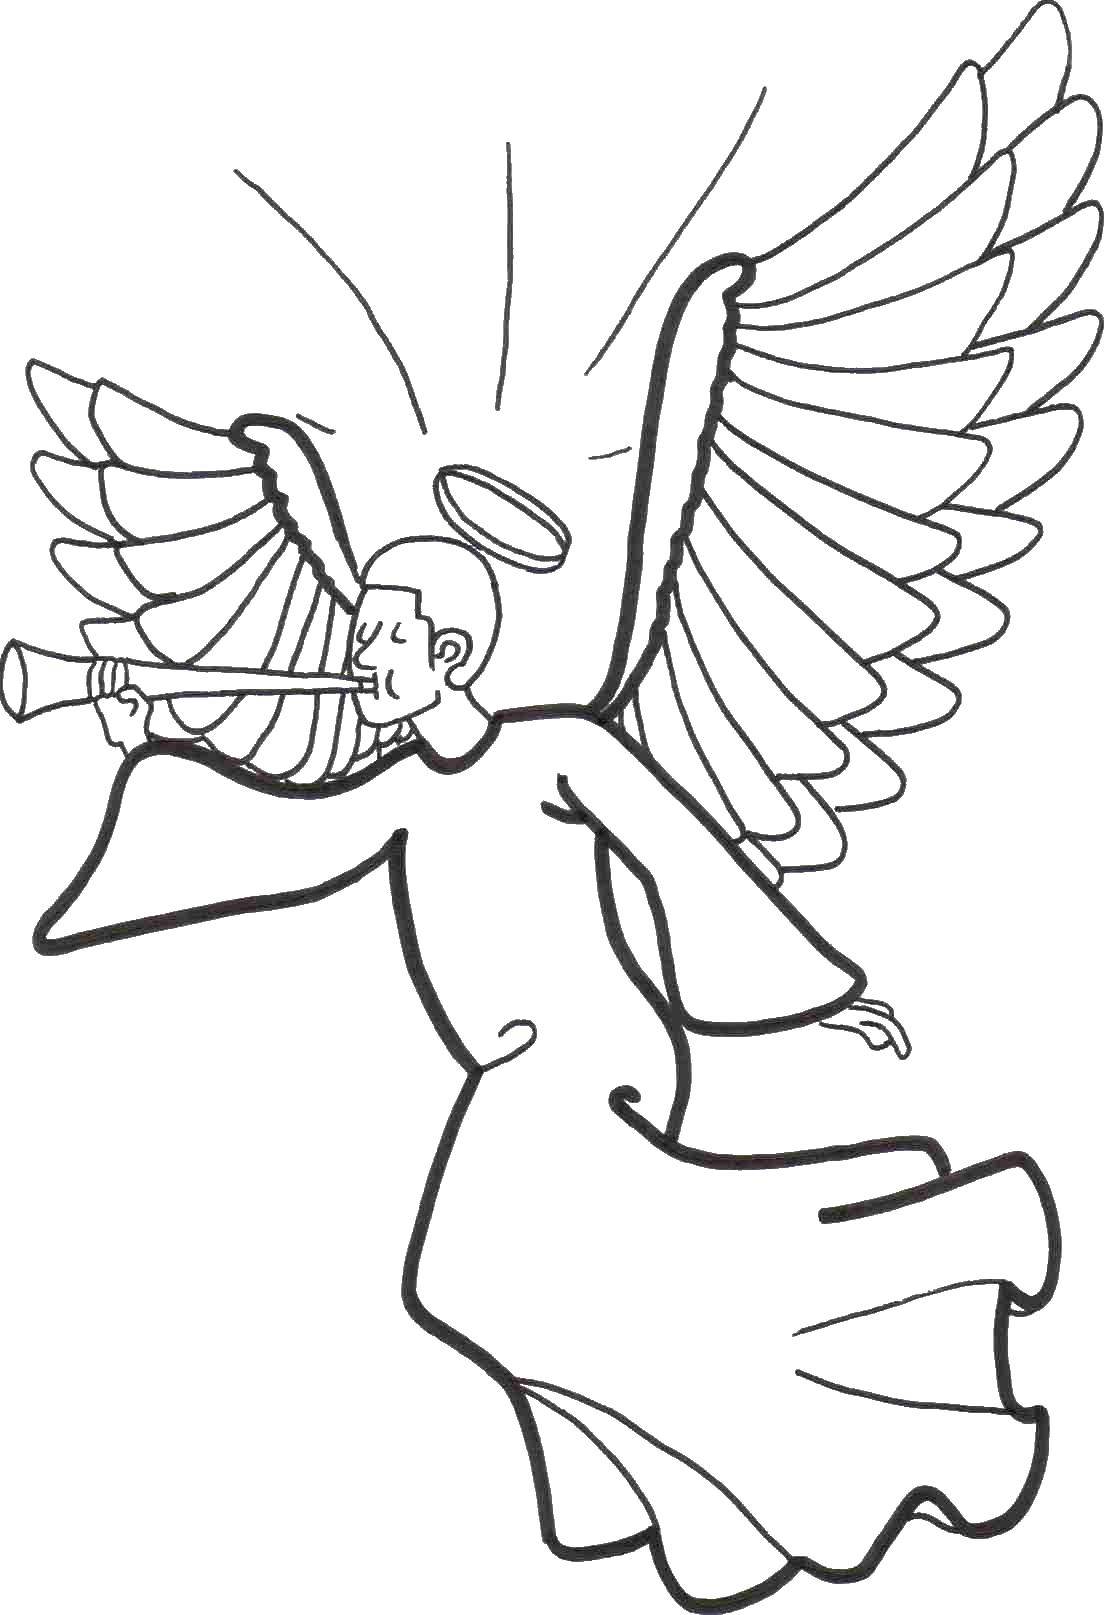 Coloring Angel with a trumpet. Category angels. Tags:  Angel, pipe.